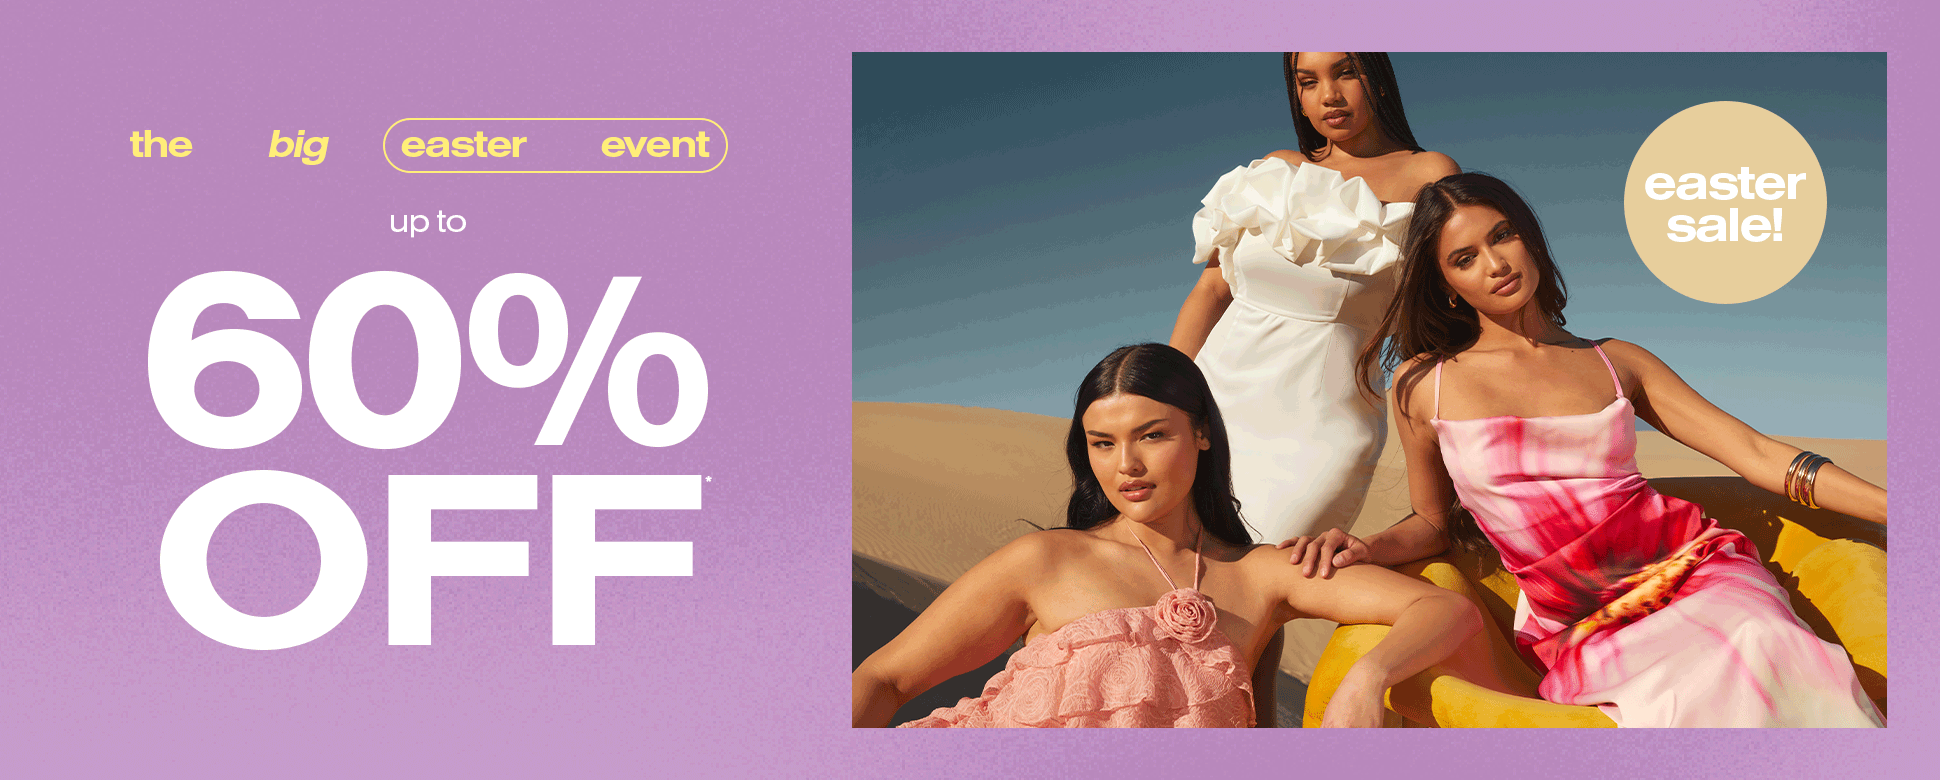 UP TO 60% OFF!